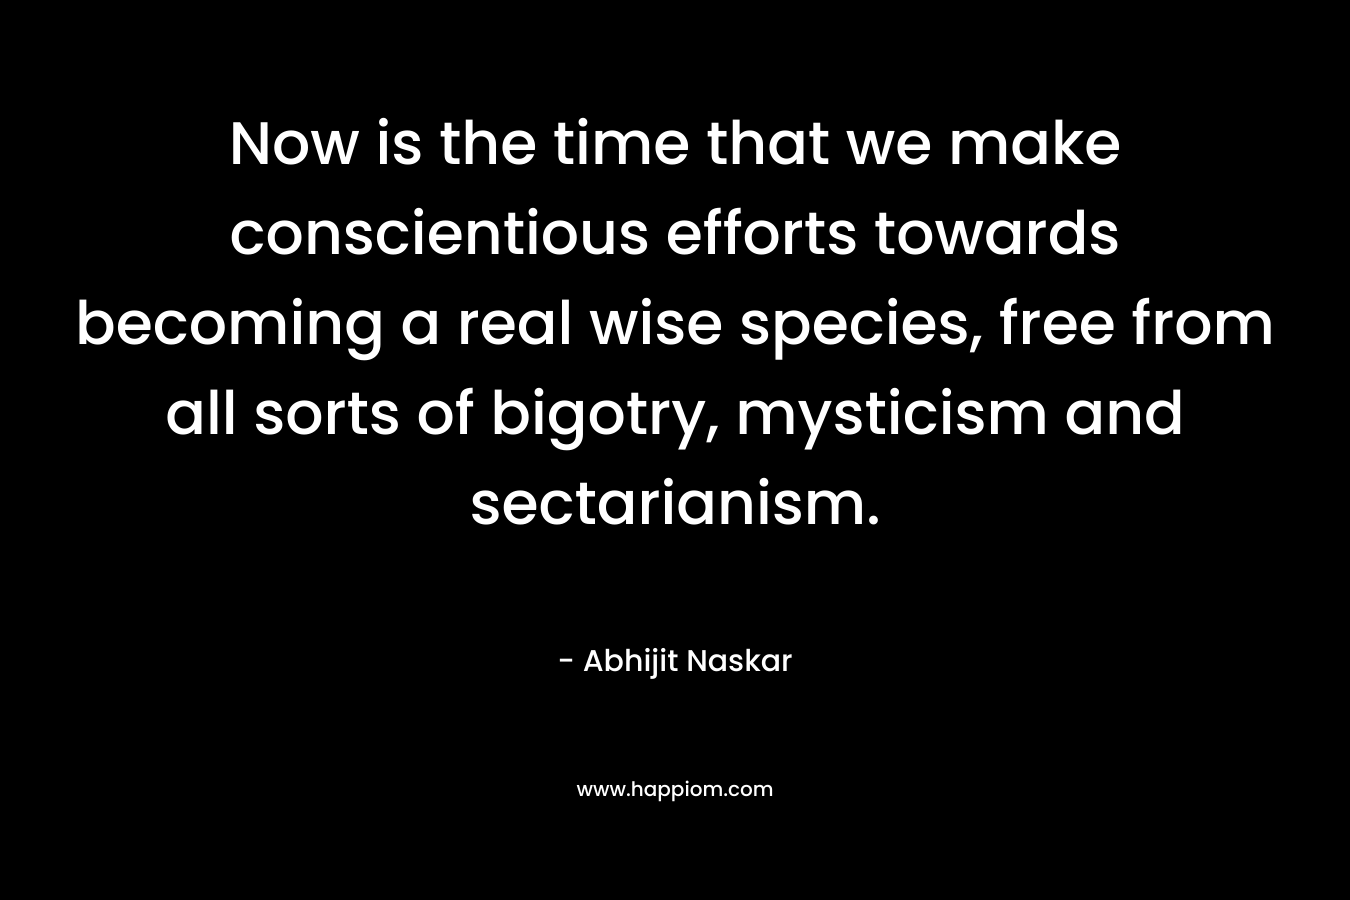 Now is the time that we make conscientious efforts towards becoming a real wise species, free from all sorts of bigotry, mysticism and sectarianism. – Abhijit Naskar